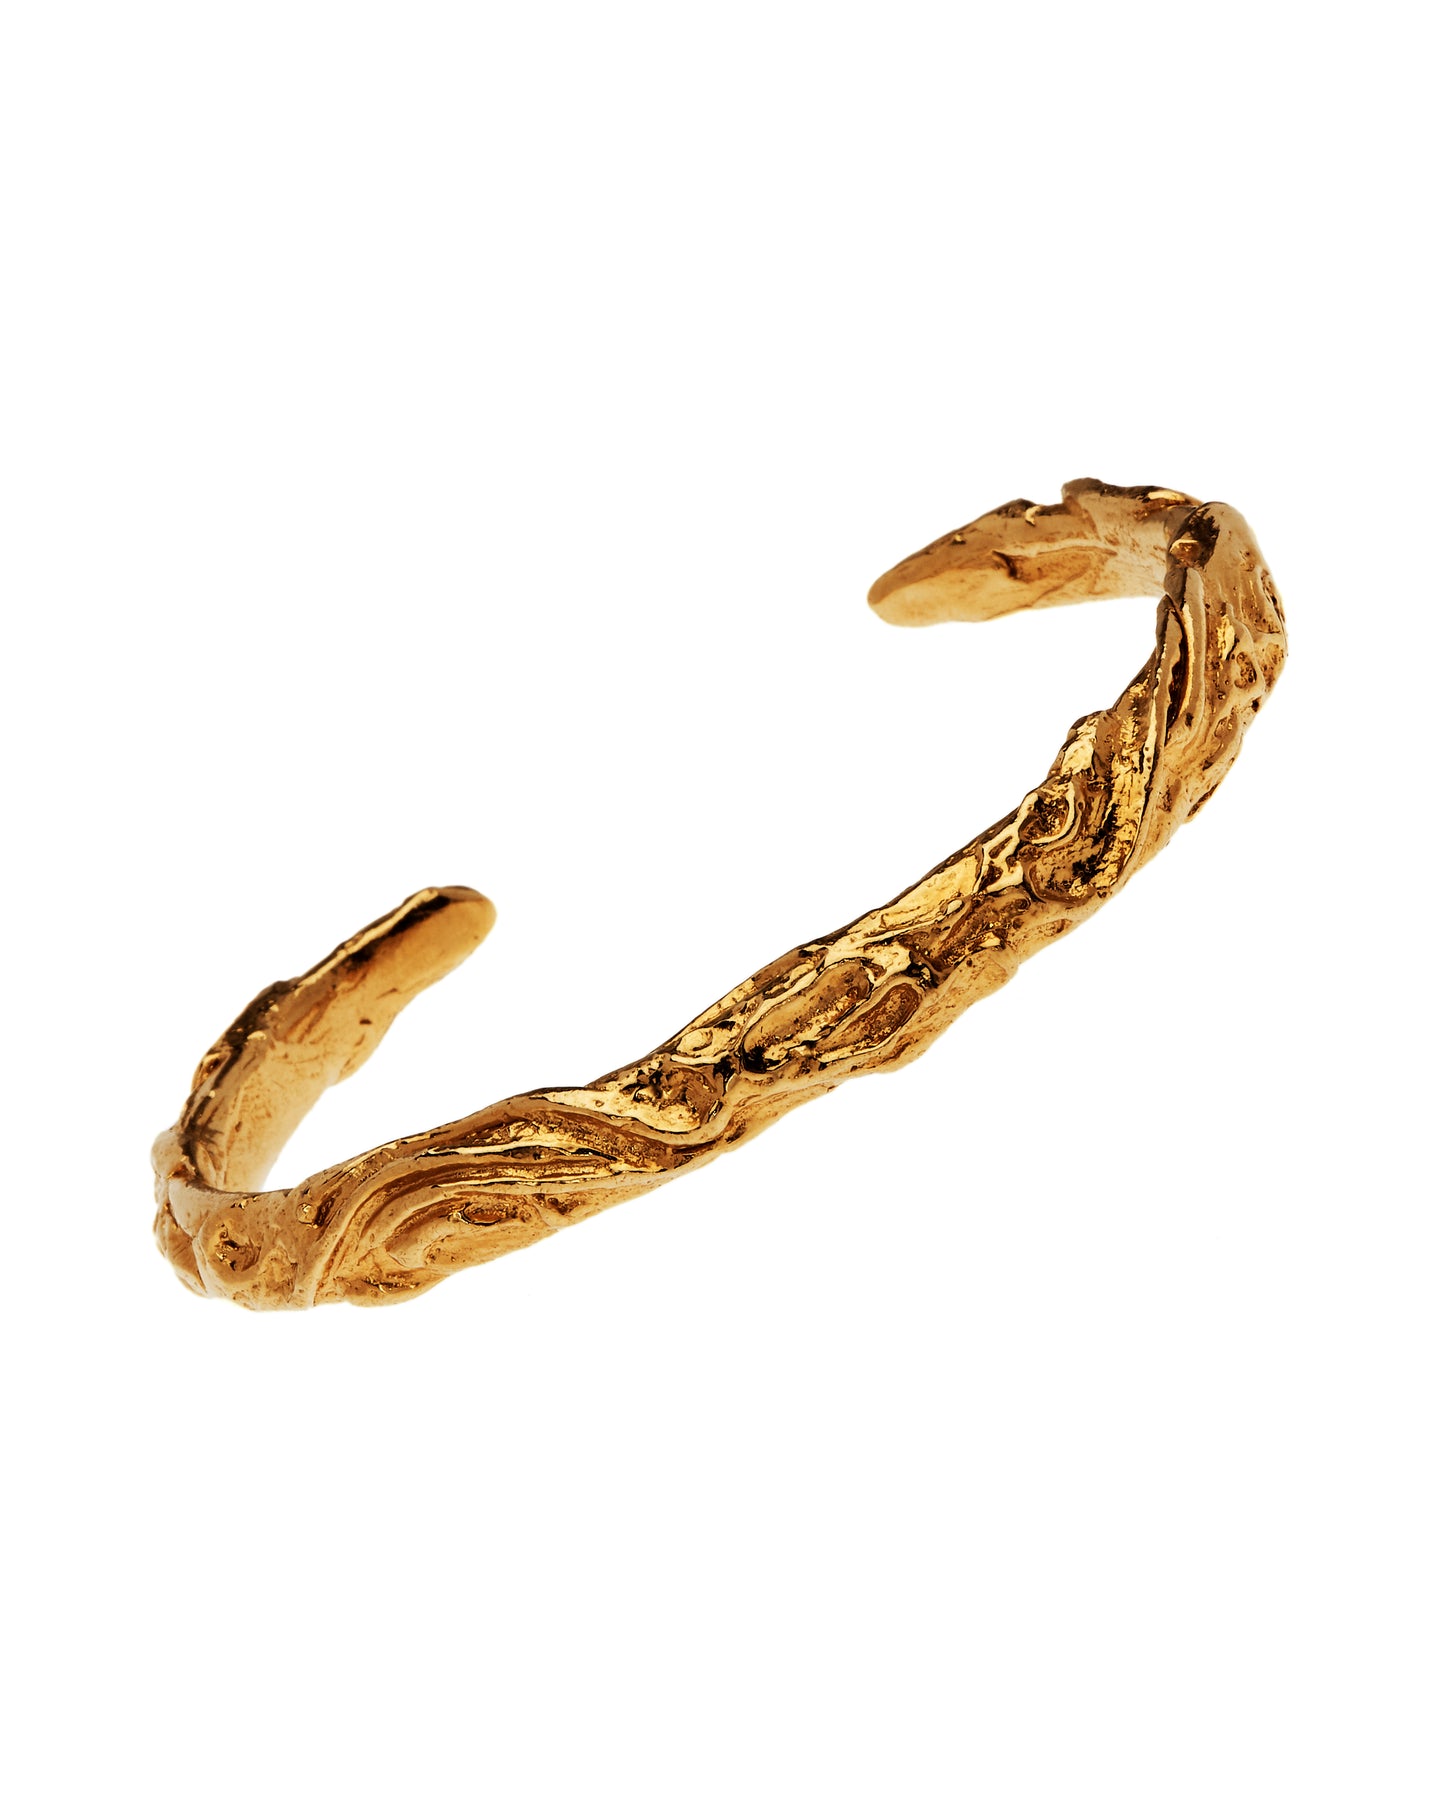 Gold vermeil open bangle with designs inspired by Newgrange